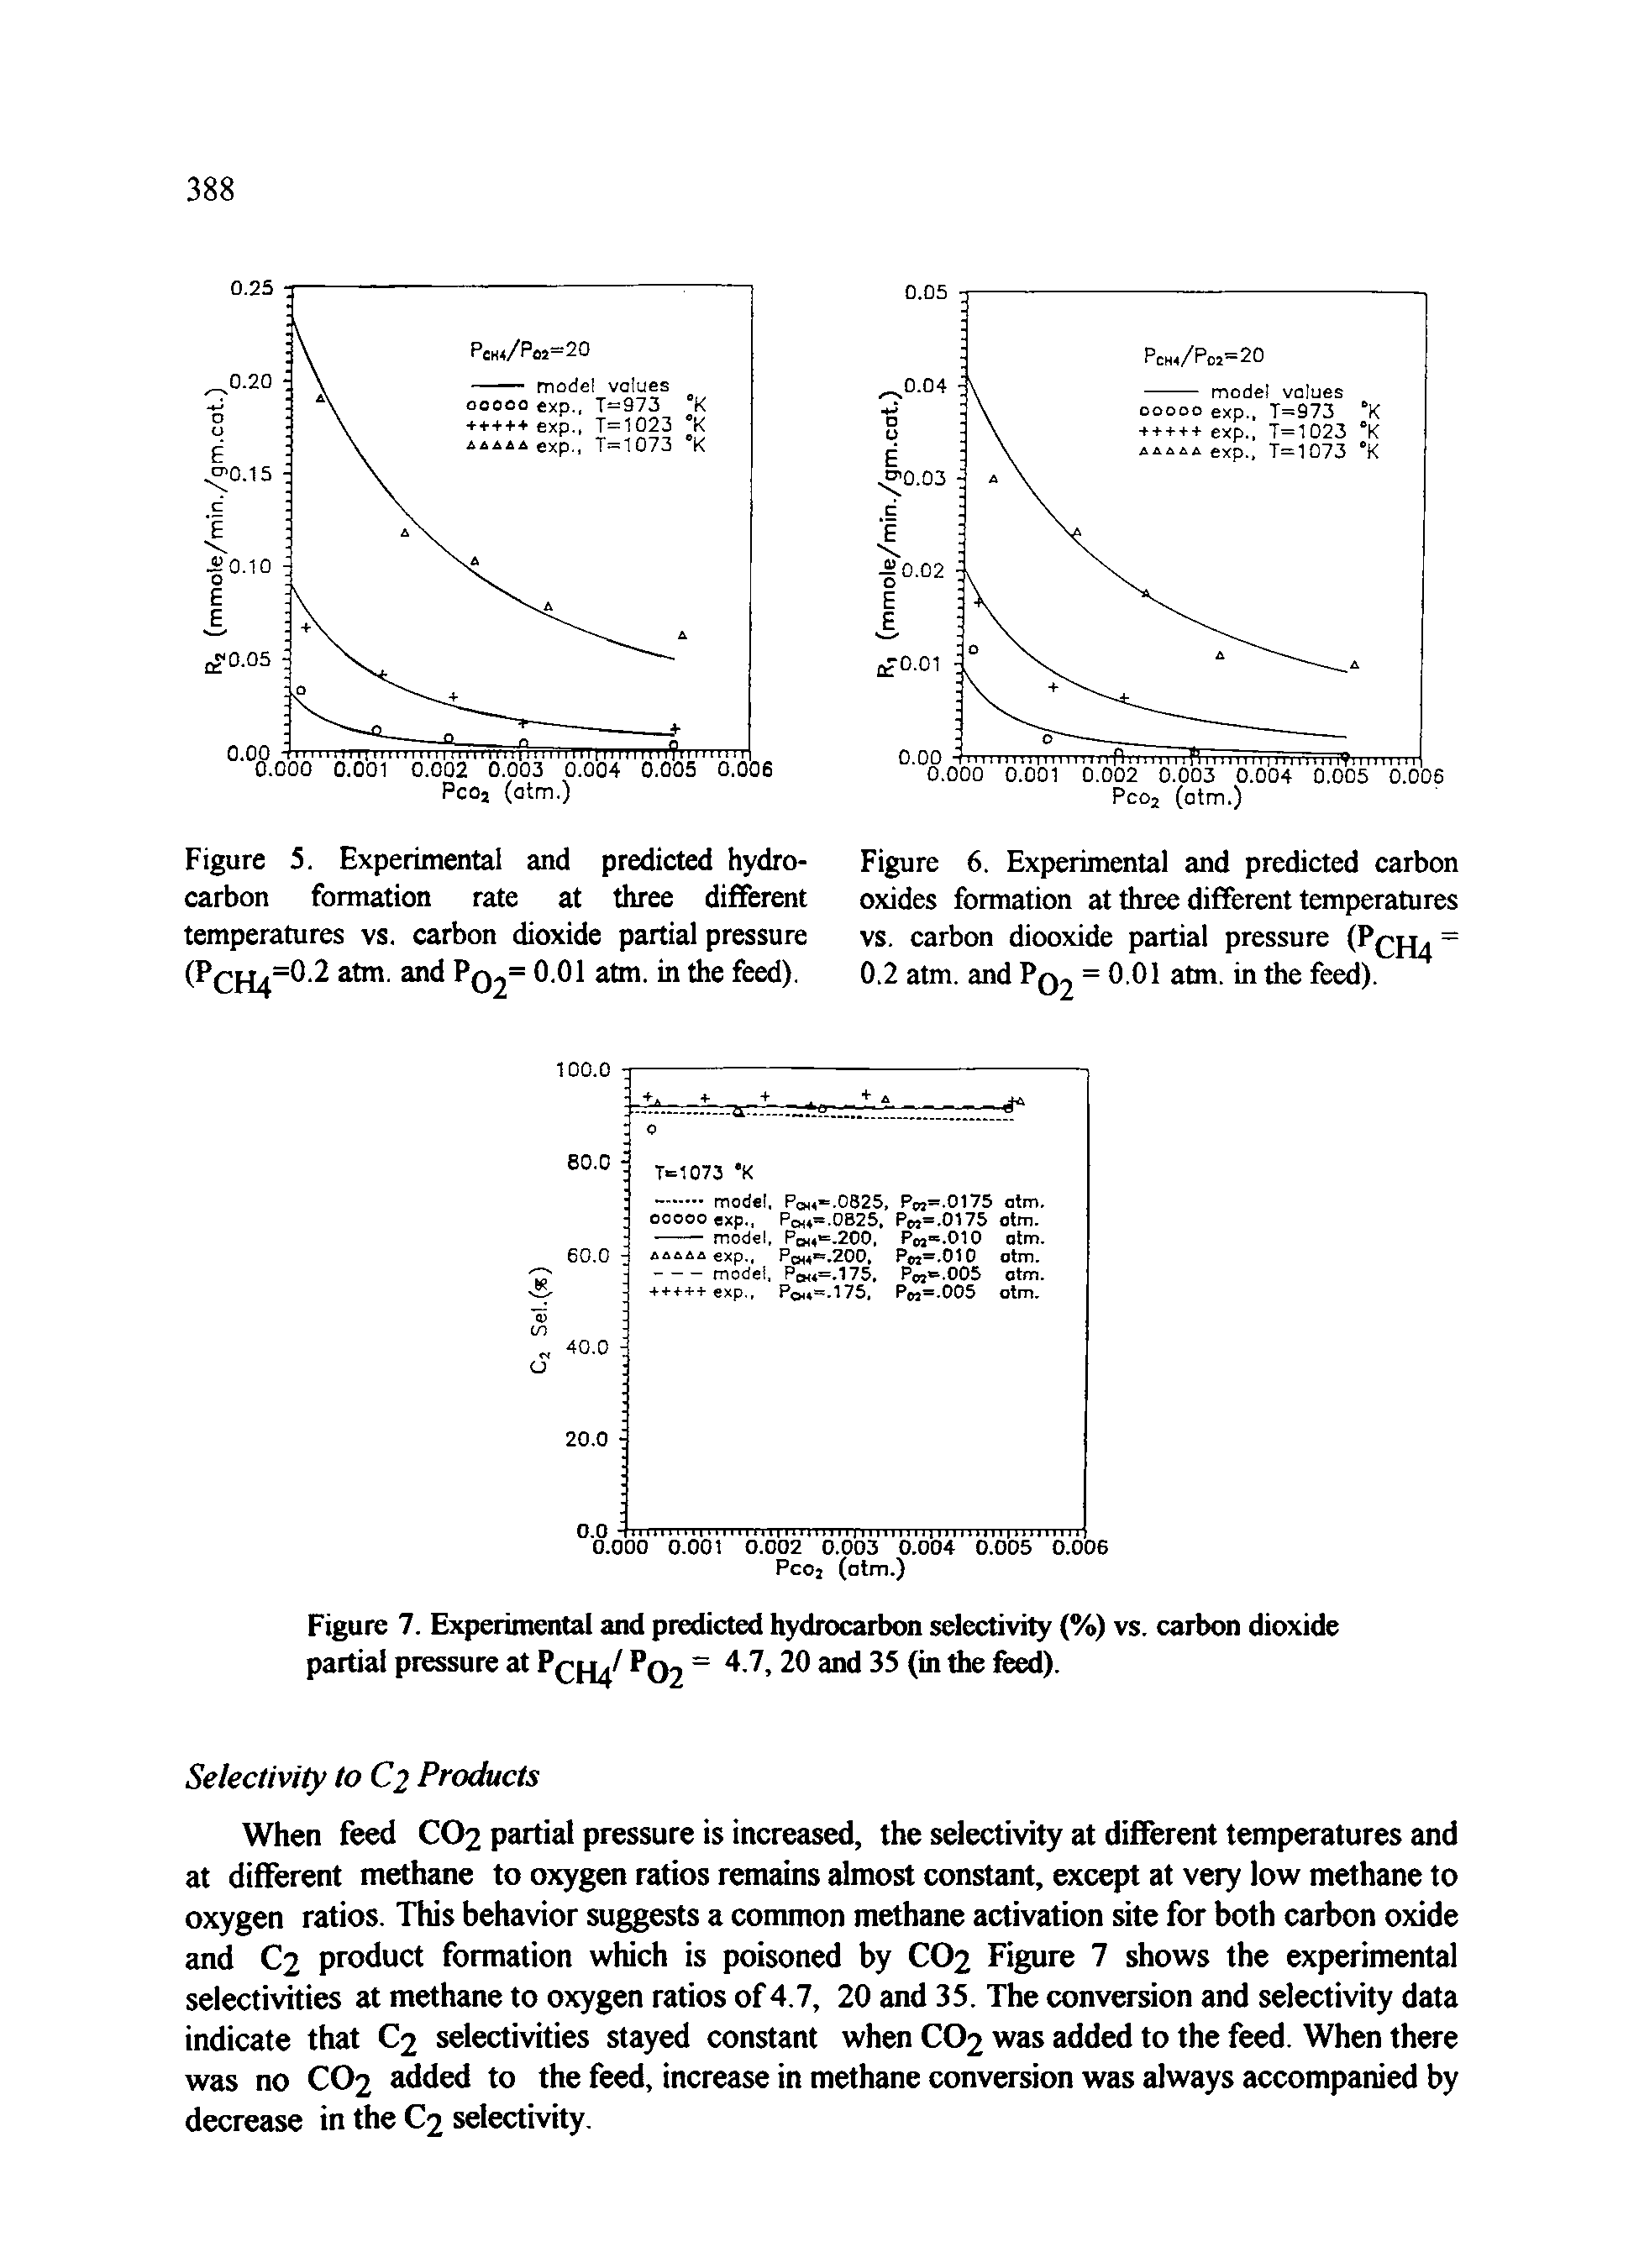 Figure 6. Experimental and predicted carbon oxides formation at three different temperatures vs. carbon diooxide partial pressure (P jj = 0.2 atm. and Pq2 = 0.01 atm. in the feed).